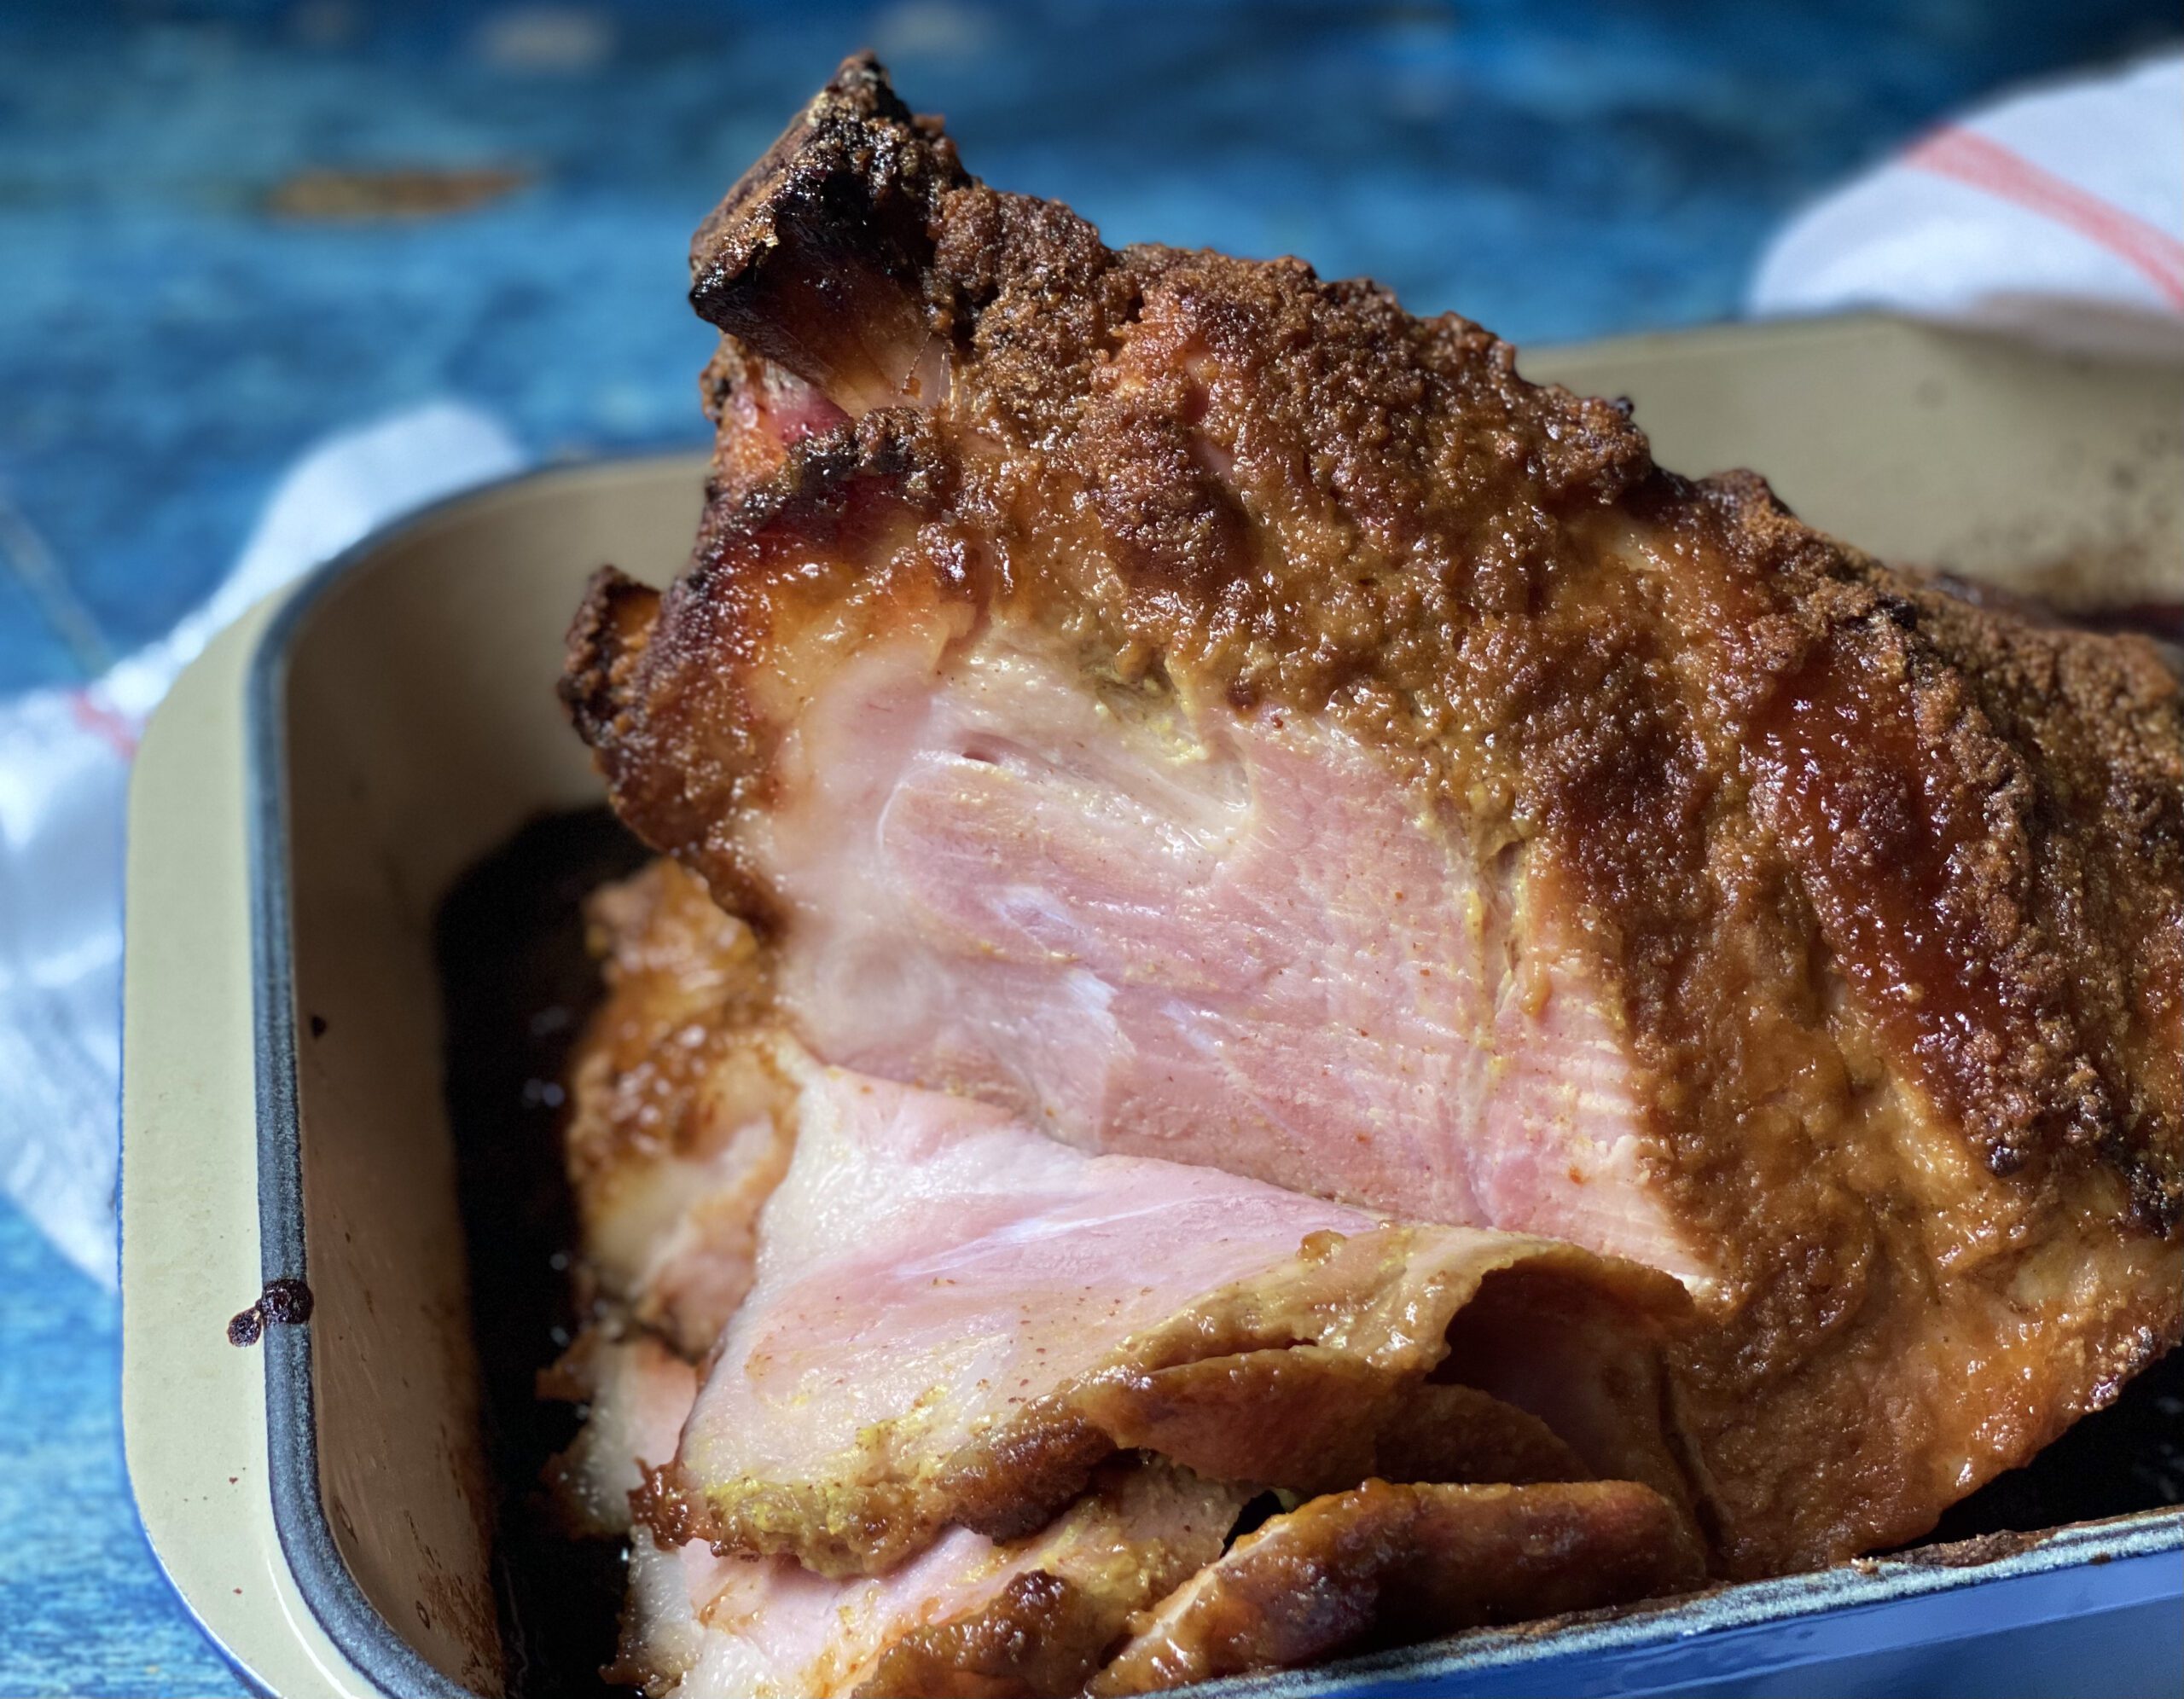 City ham with a crispy crust featuring brown mustard, bourbon, and gingersnap cookies, offering a flavorful twist on a classic dish.